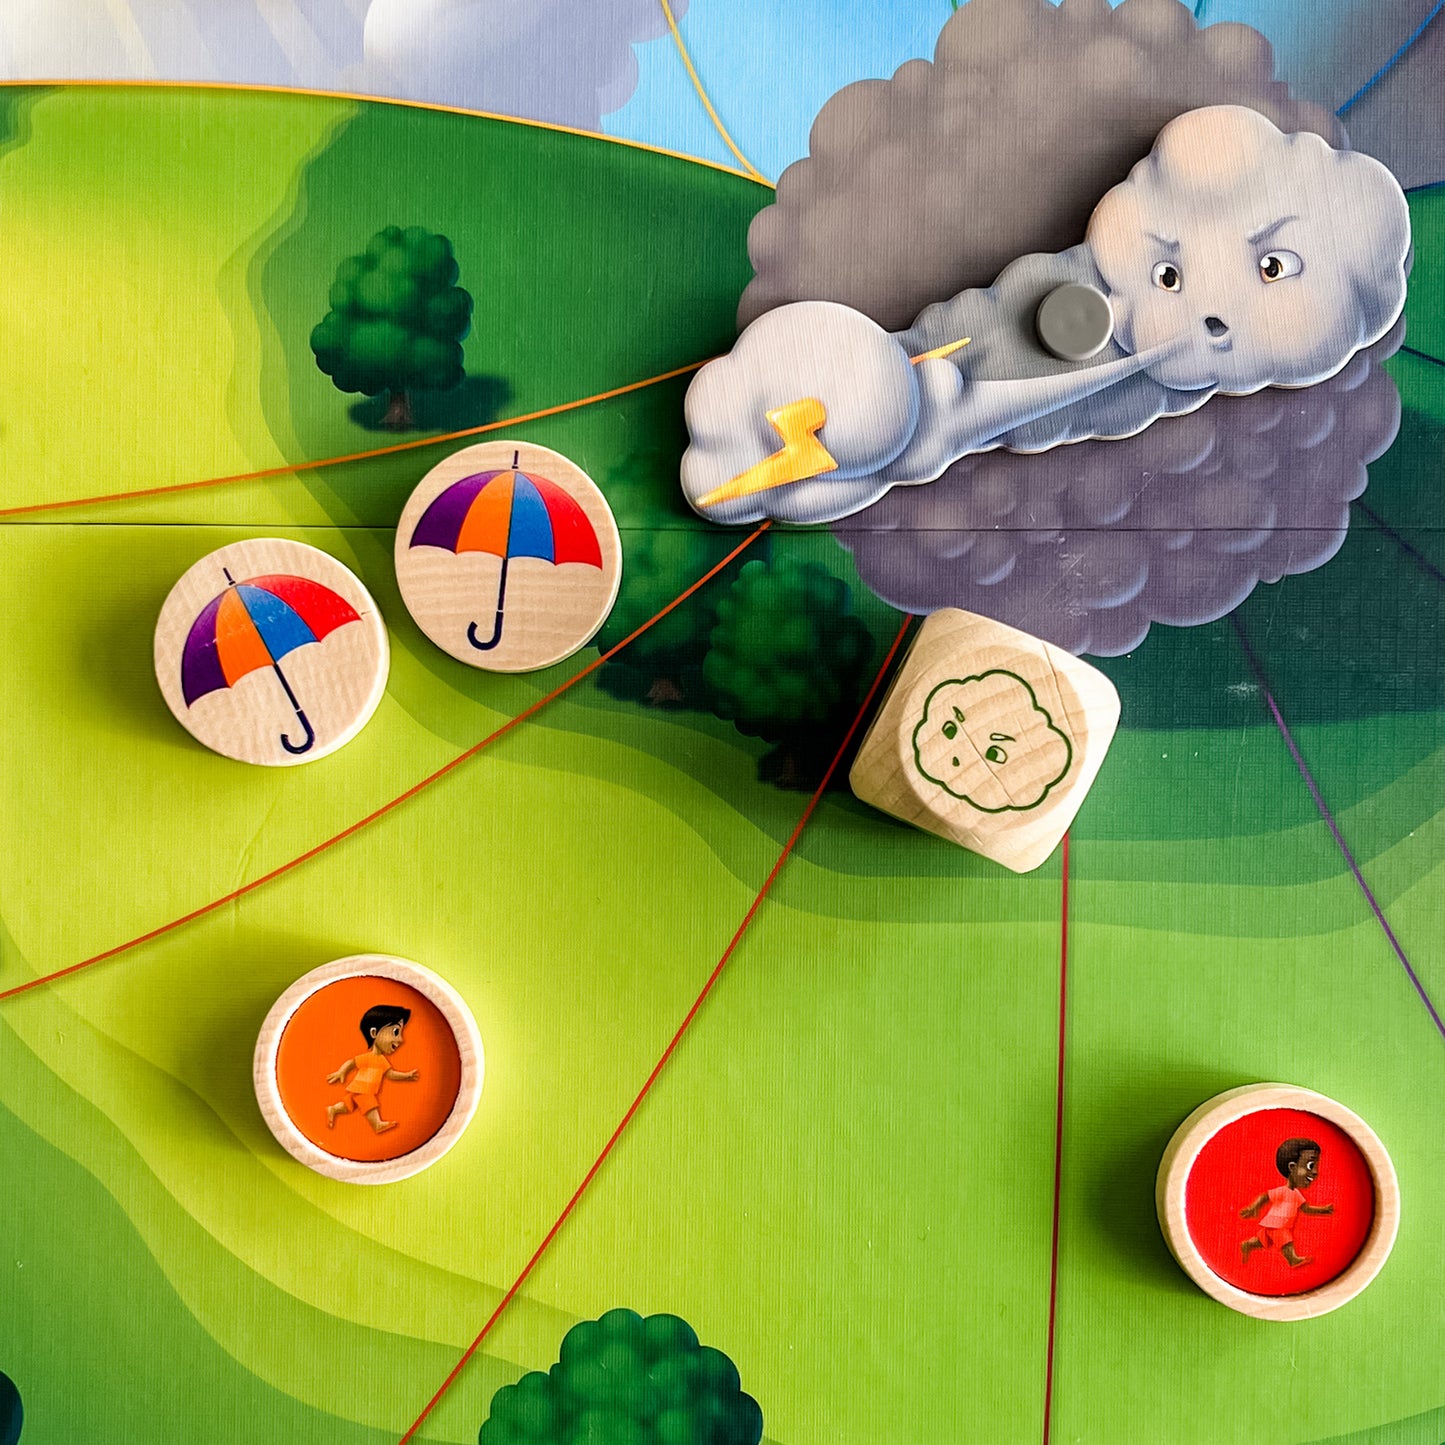 Sunshine Rescue by SimplyFun is a fun decision making game for ages 7 and up.